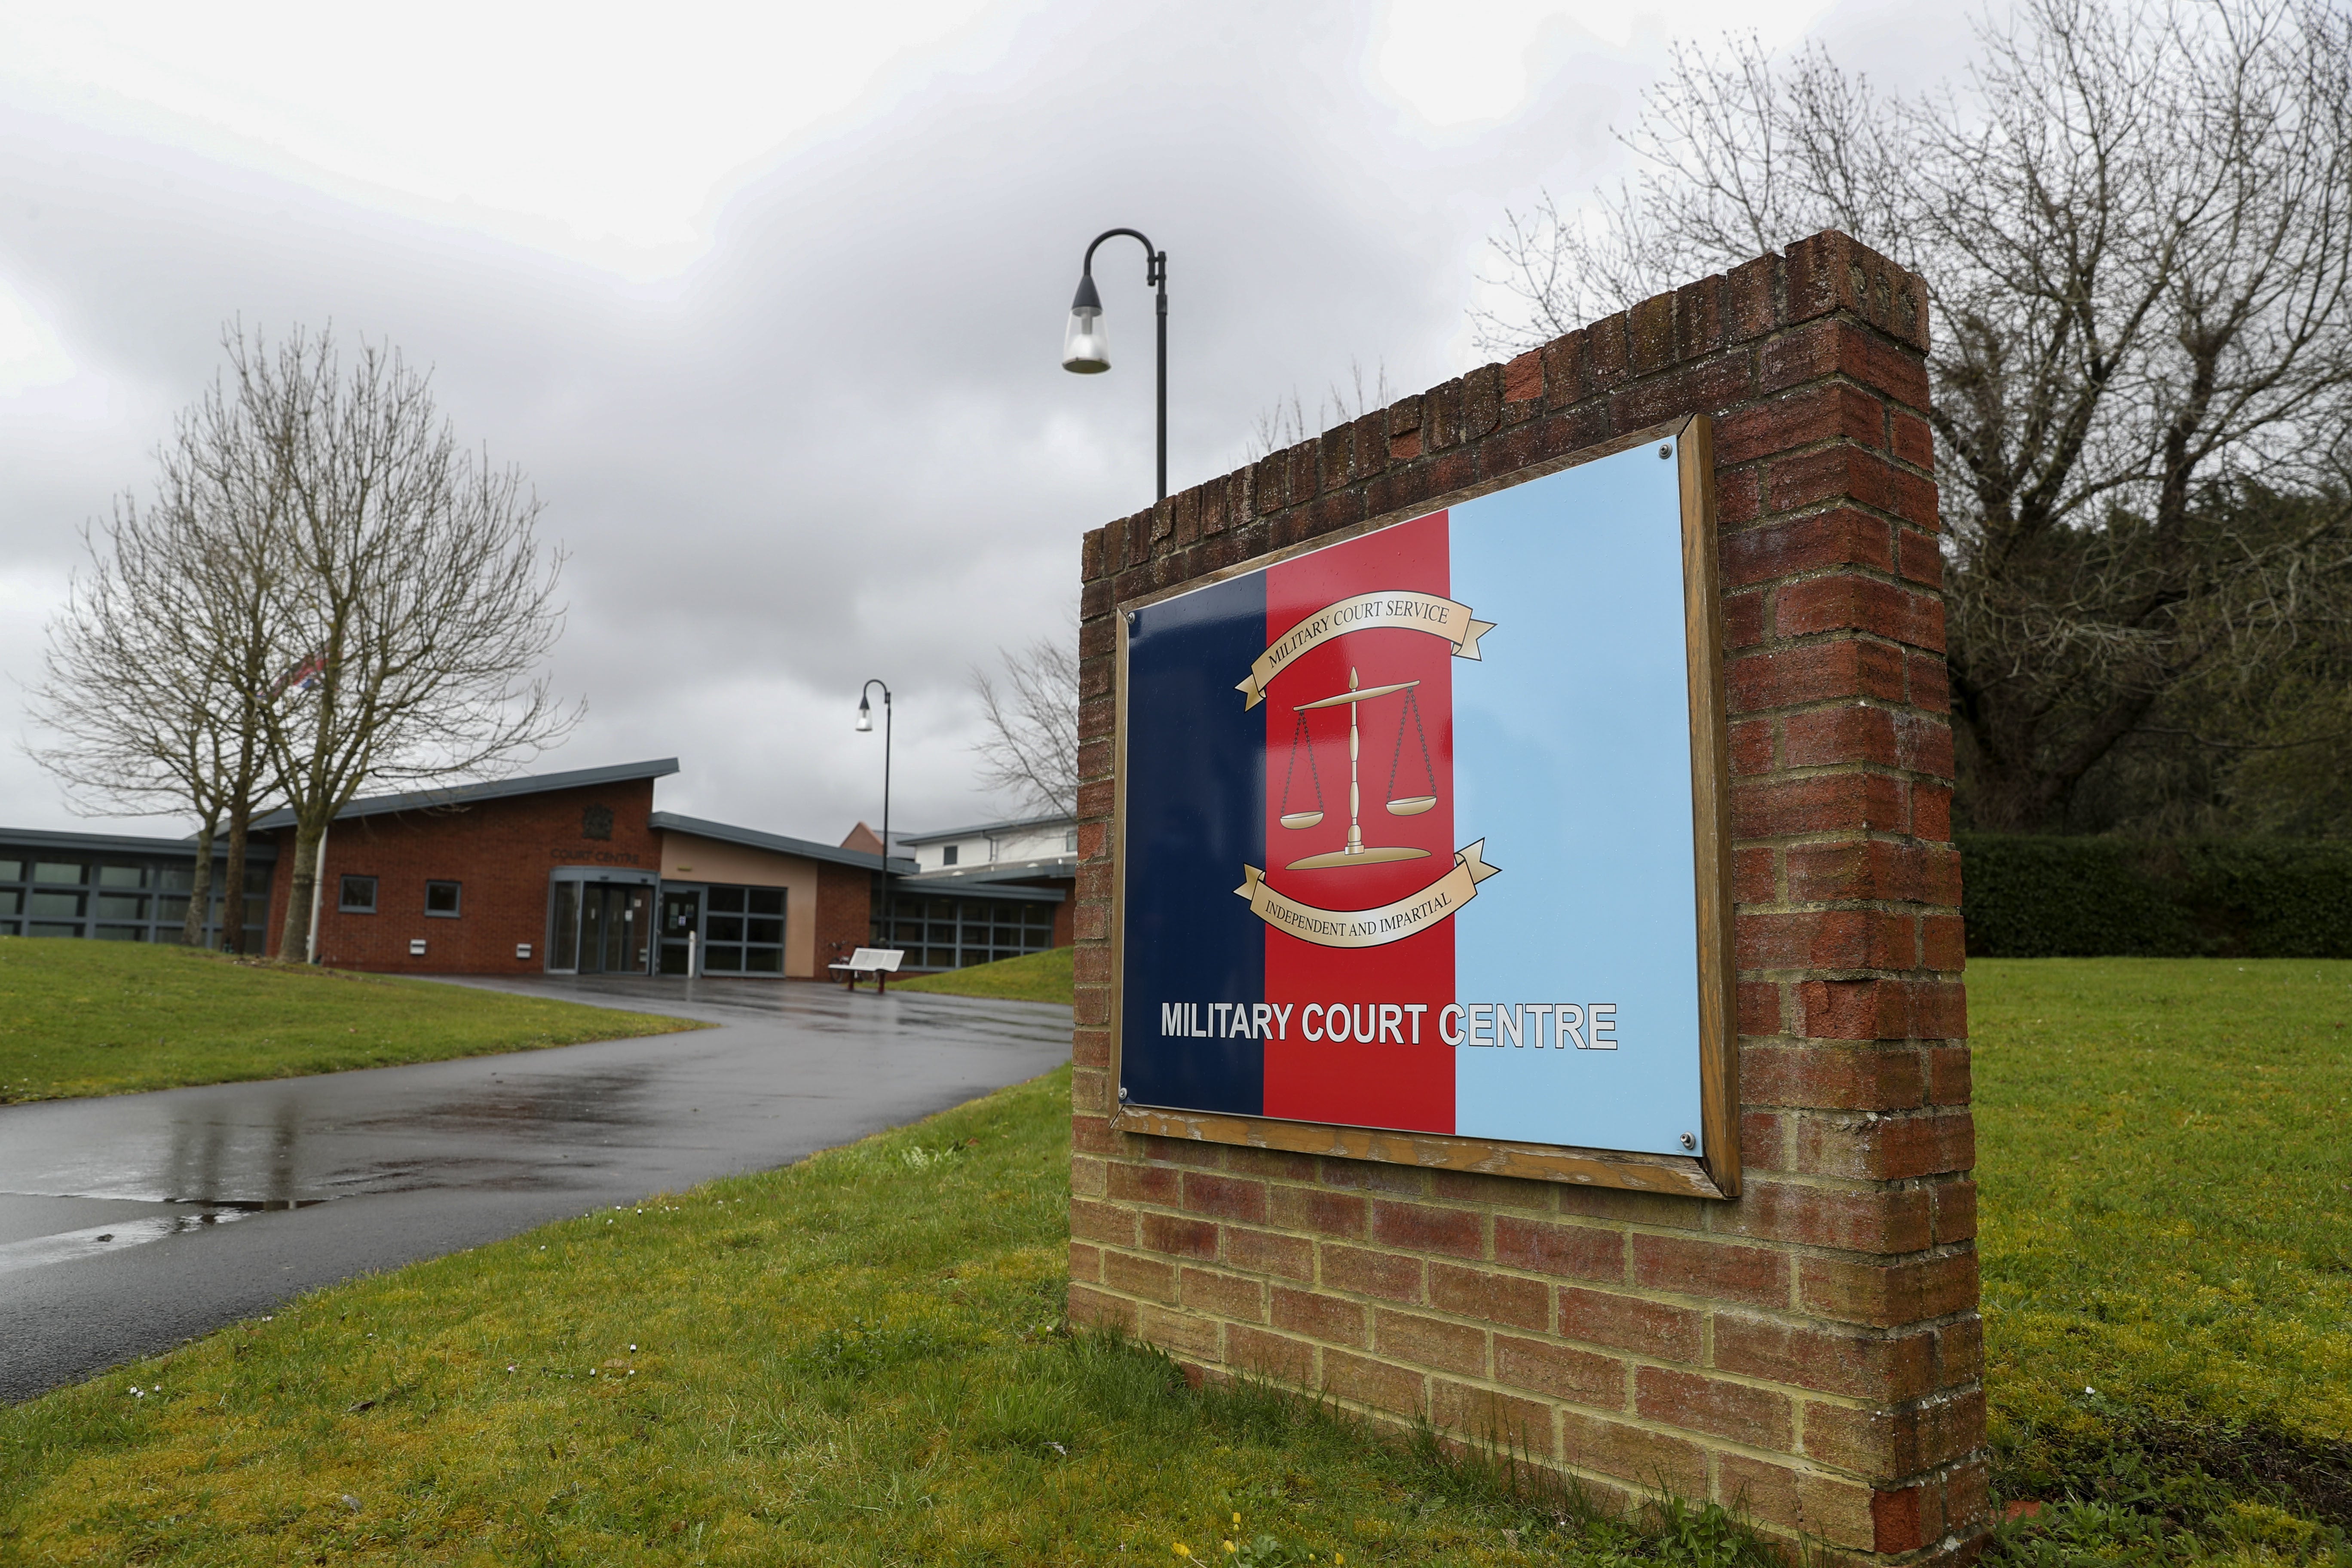 Senior British Army soldier Adam Graham was prosecuted at Bulford Military Court Centre